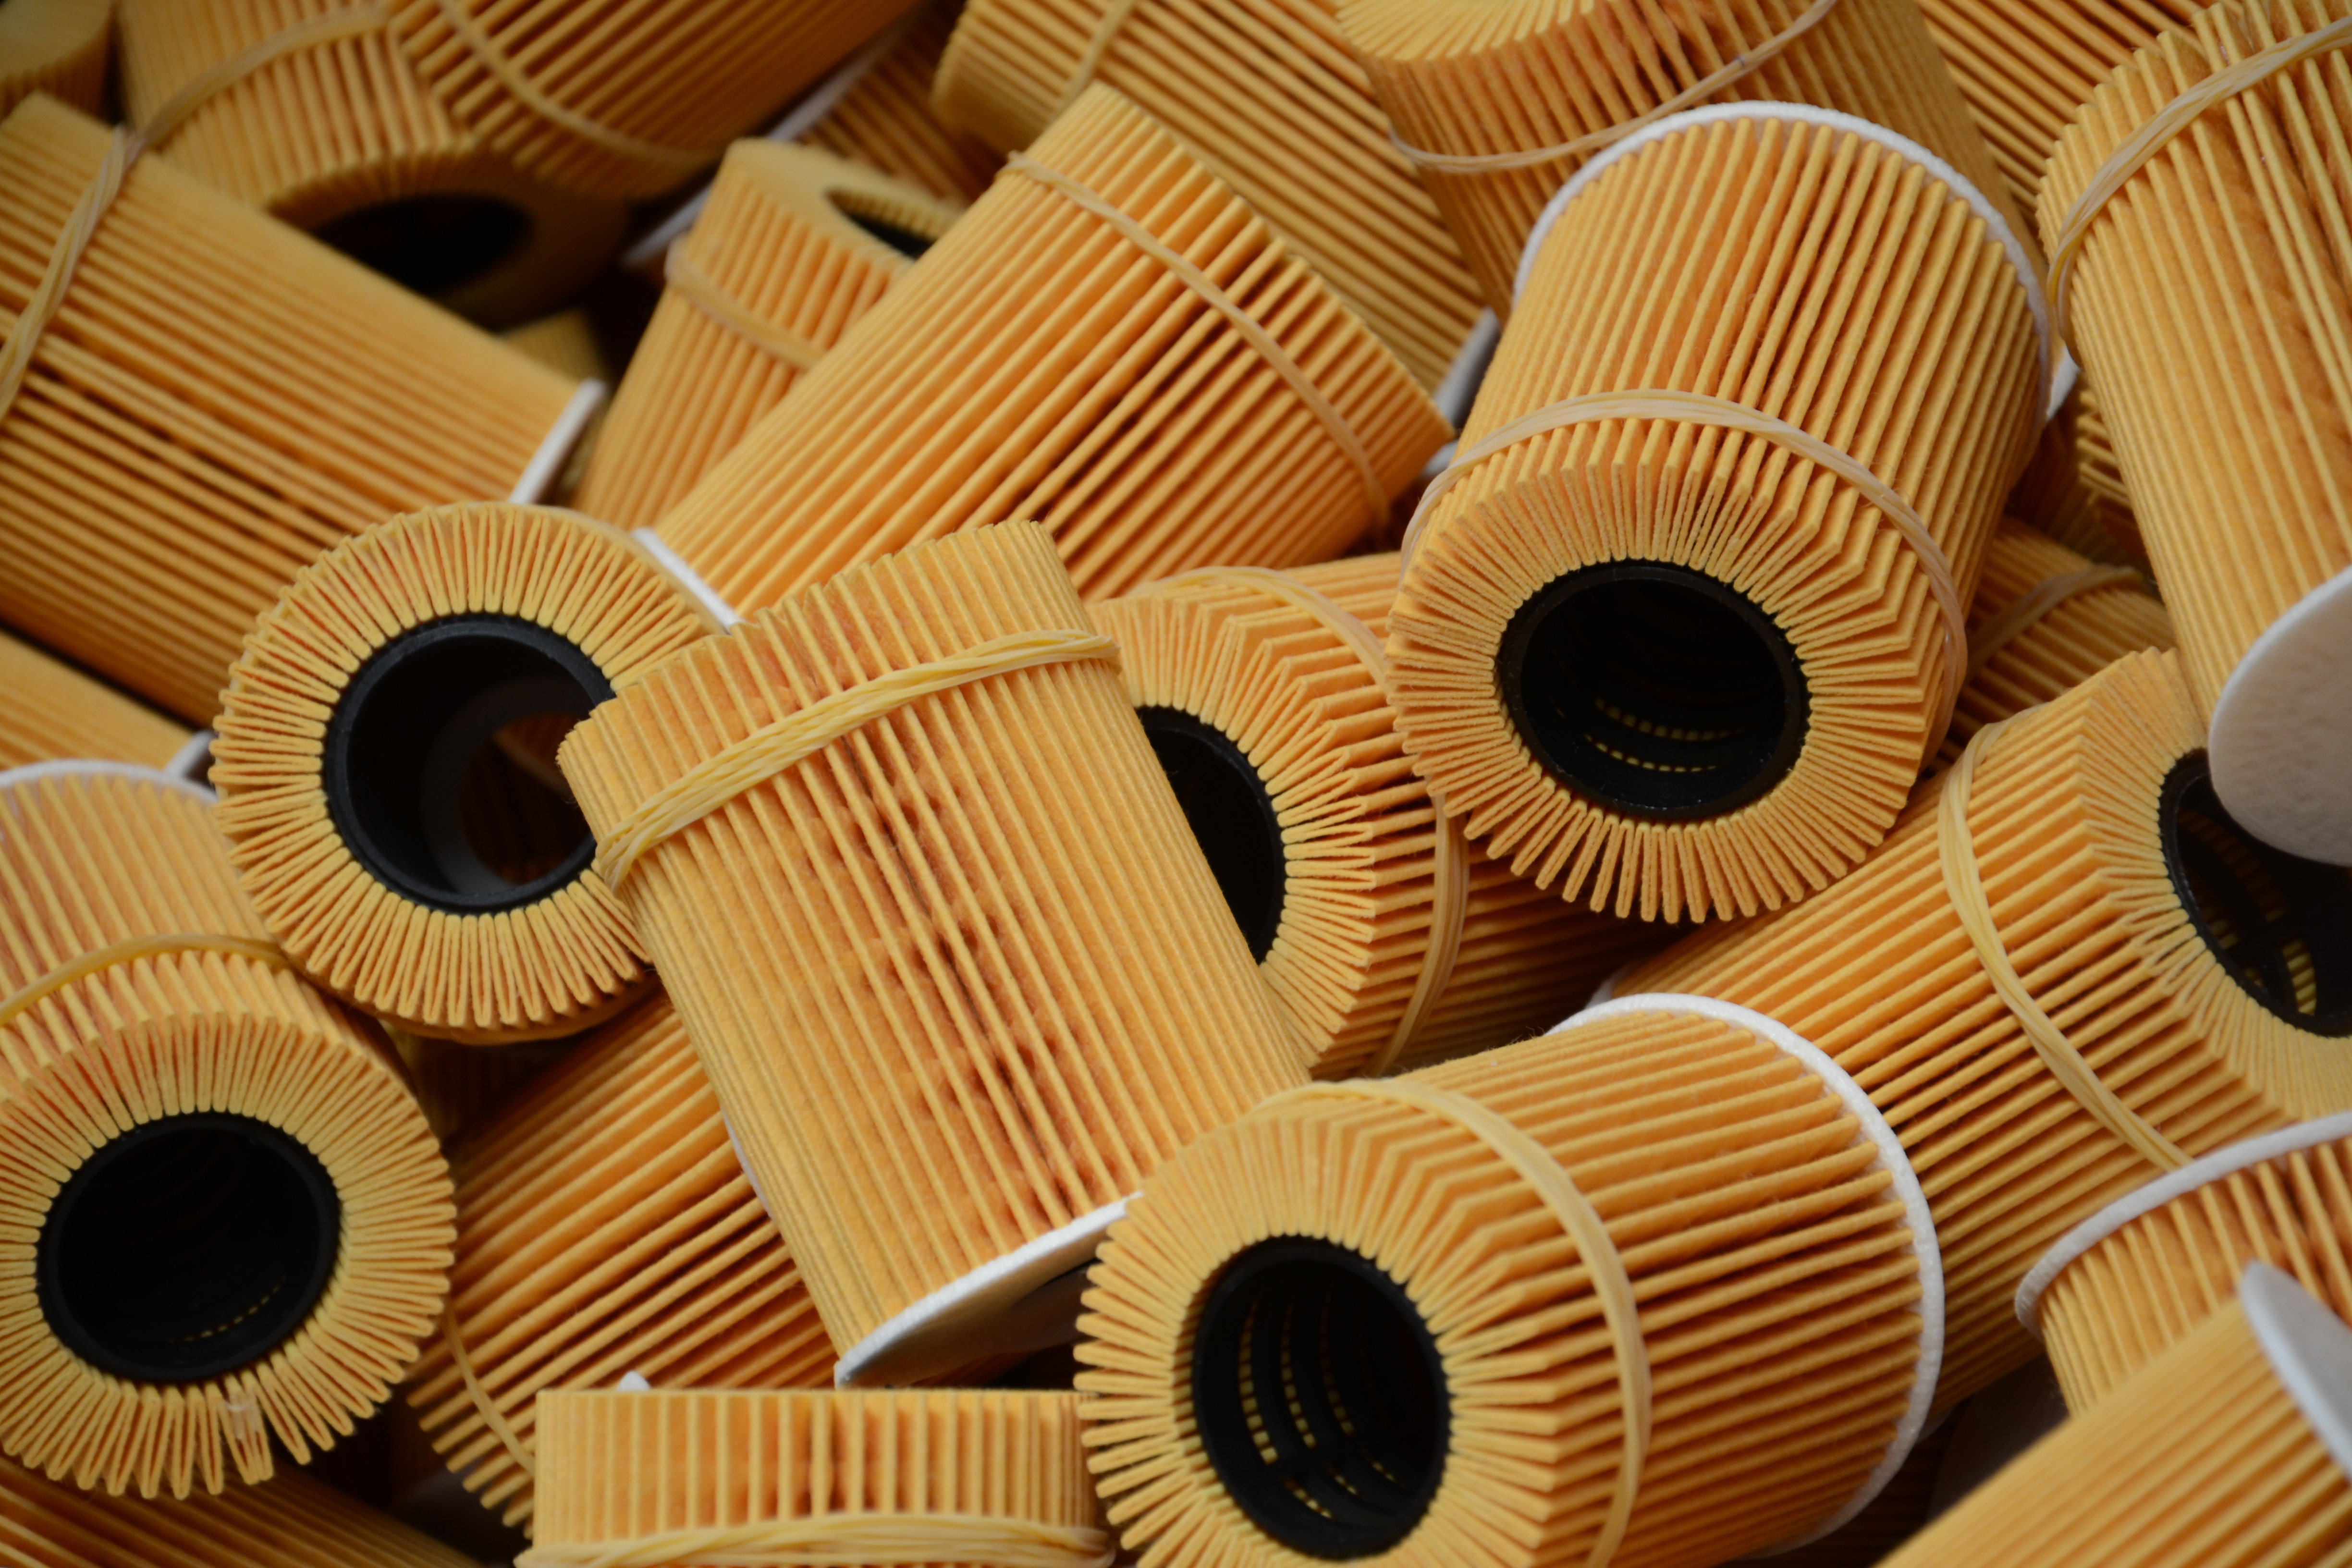 The importance of filter paper in the filter